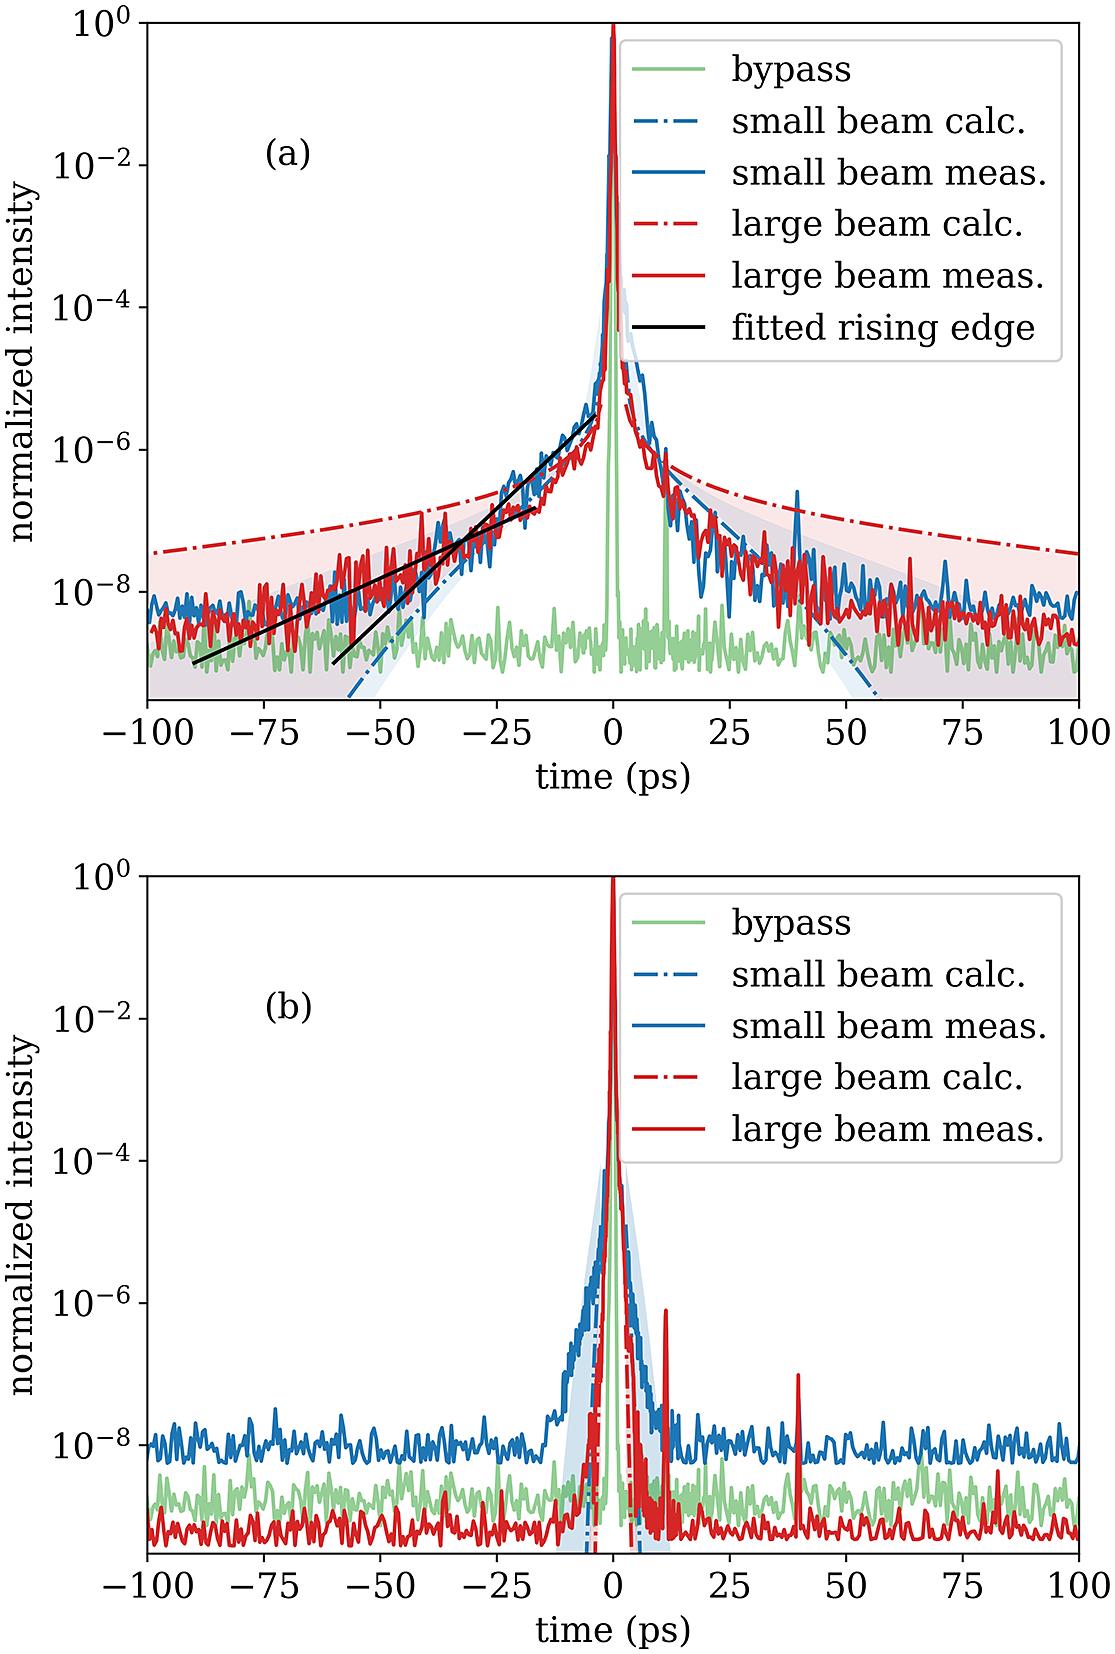 Measured temporal profile of a laser pulse that was amplified in a uOPA stage (bypass), after transversing through a folded stretcher (a) or an unfolded stretcher (b). The measurements were executed for a smaller beam size, indicated as blue in the plot (FWHM = 1.1 mm) and a larger beam size, indicated as red in the plot (FWHM = 5.8 mm). Shaded areas indicate uncertainties of the alignment procedure. The black lines indicate the slope of the rising edge, with the steeper line corresponding to the smaller beam.